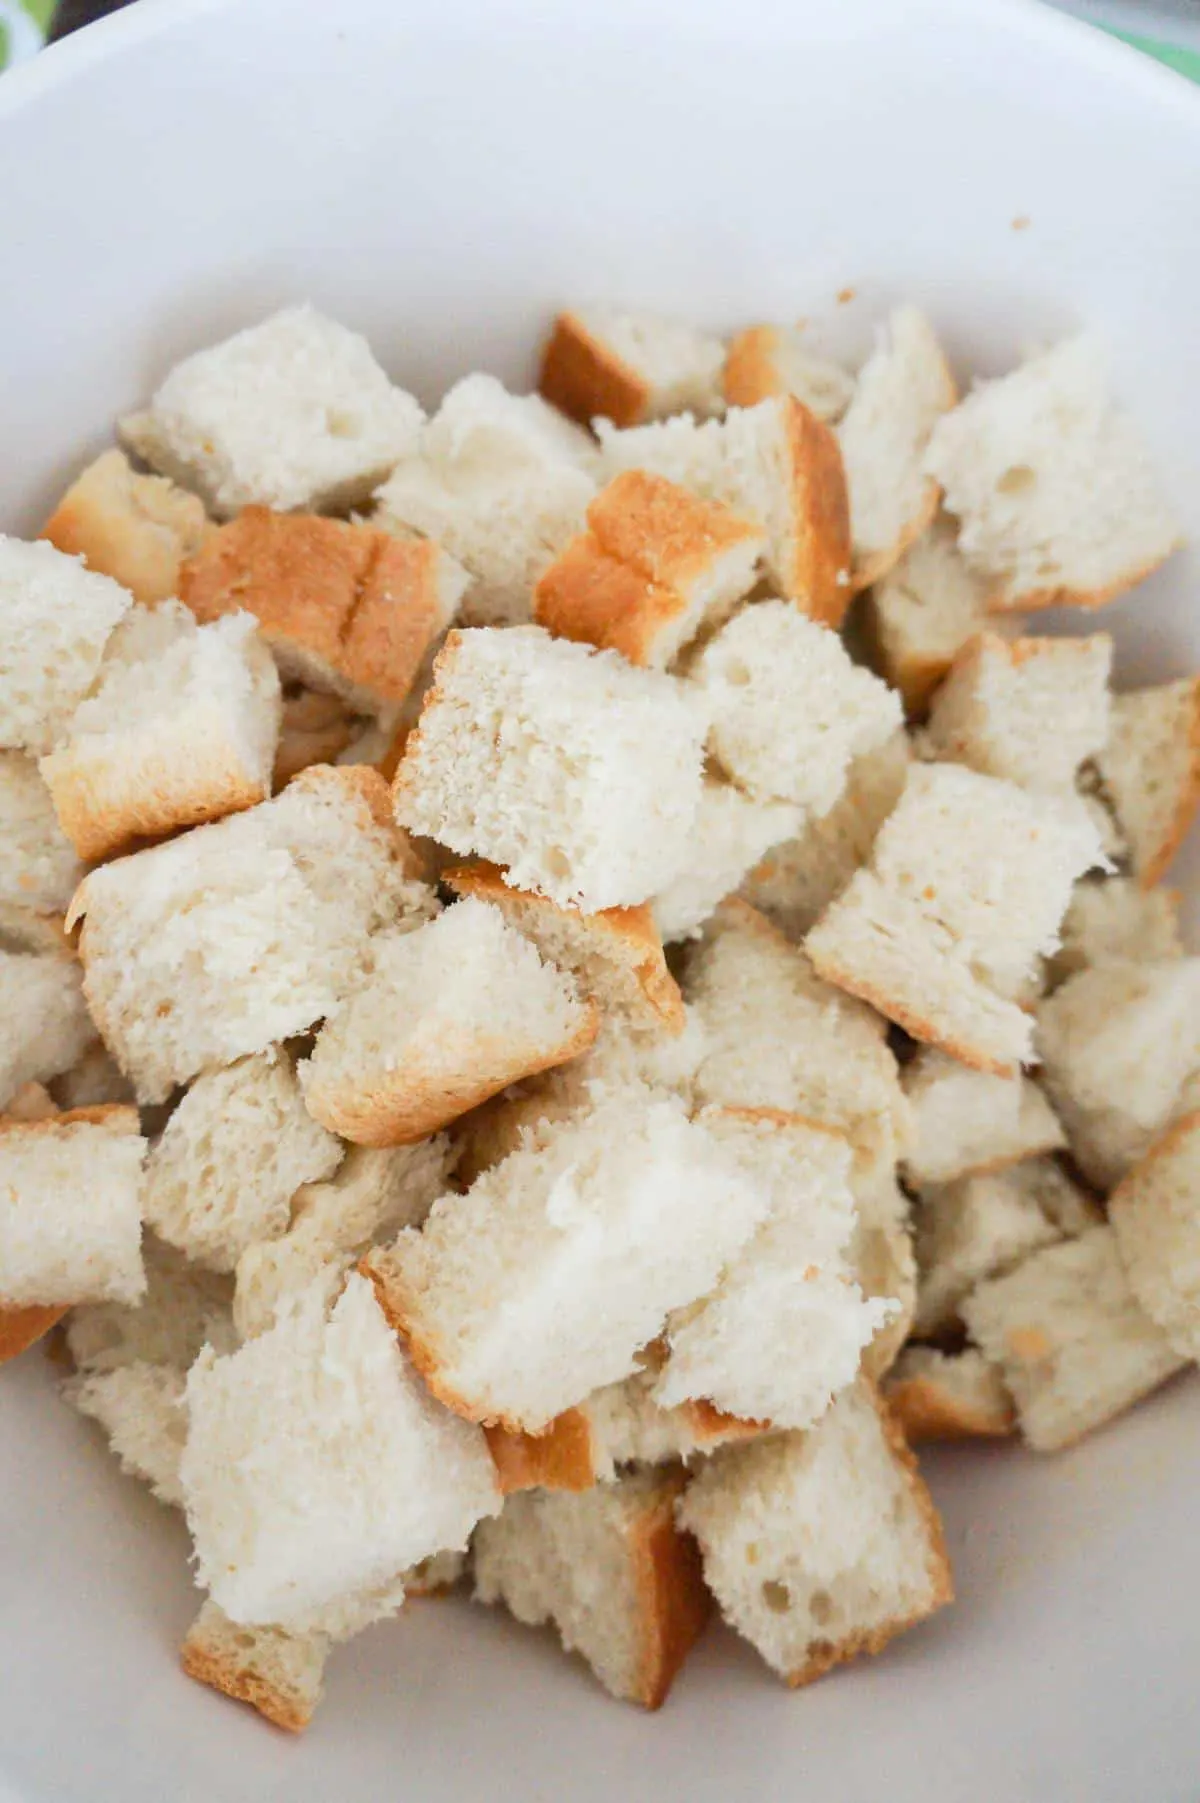 cubed bread in a mixing bowl